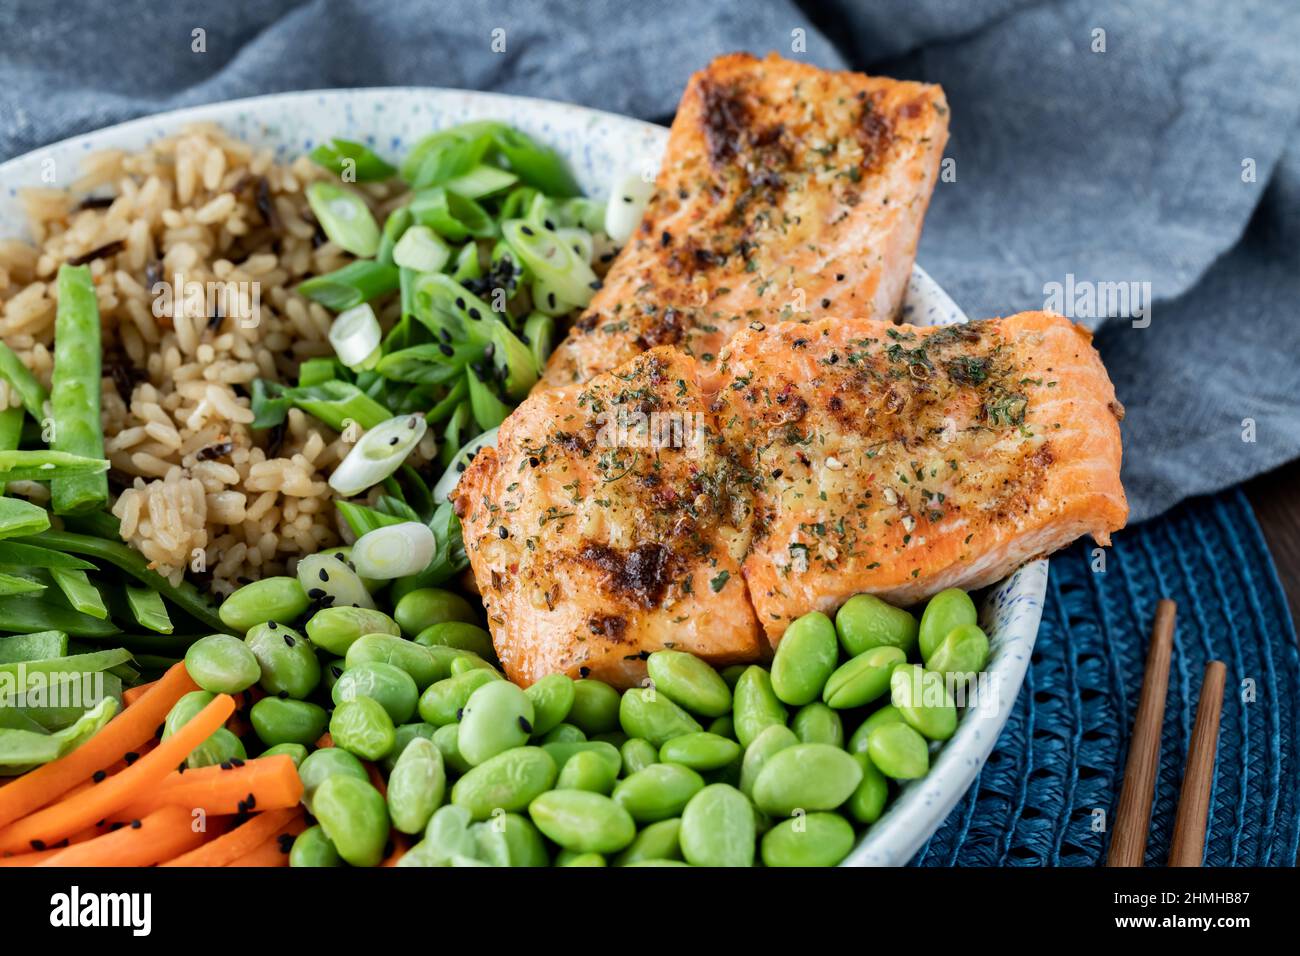 Close up view of salmon fillets in an Asian salmon salad bowl. Stock Photo